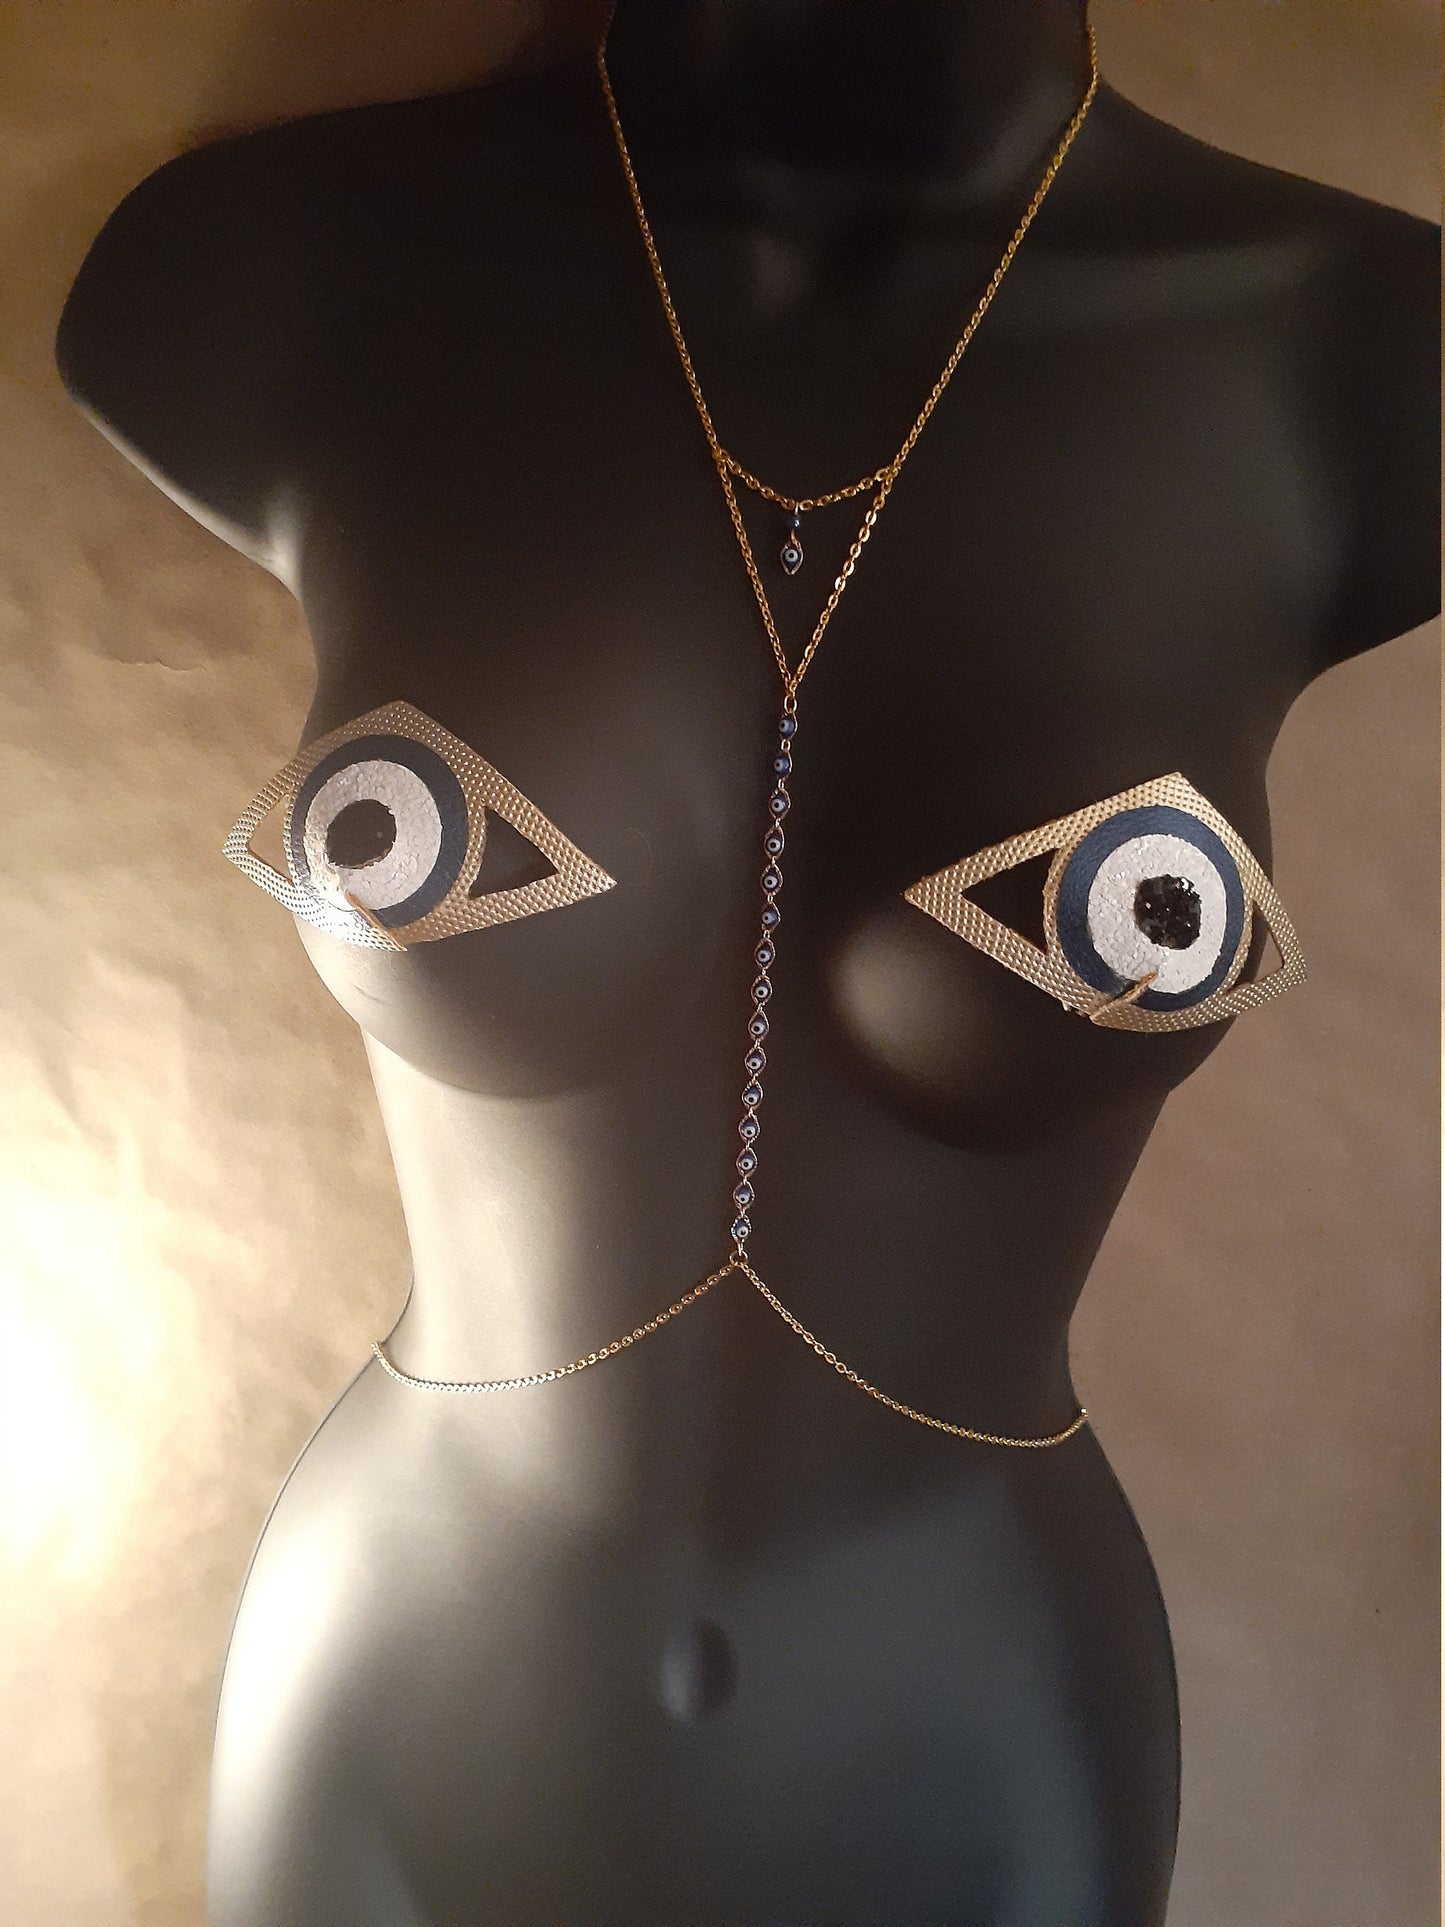 Customized body chain option available